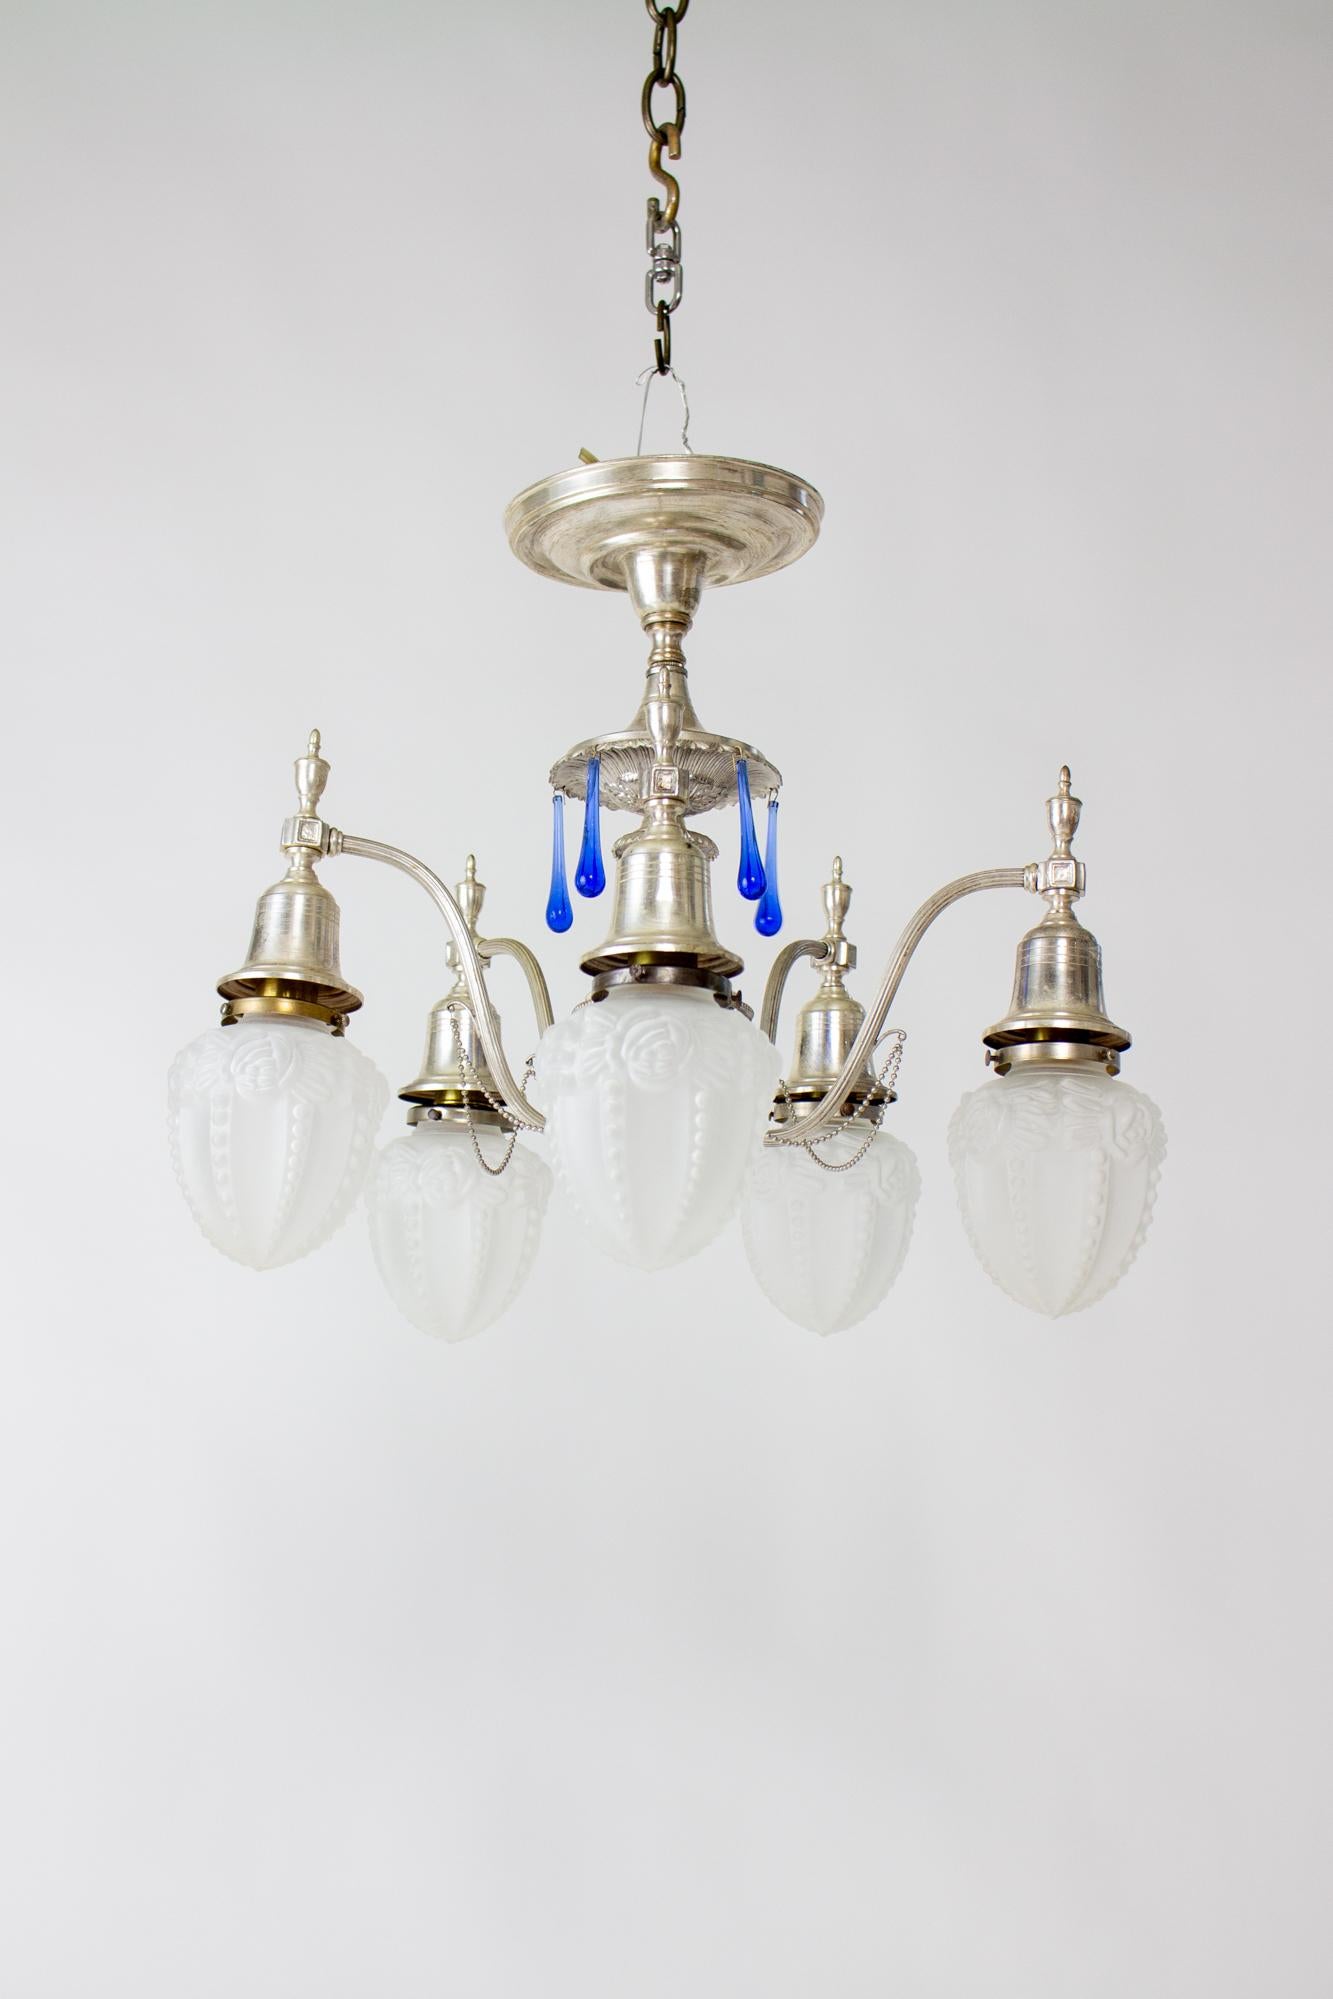 Early 20th century silver plate flush chandelier with blue crystals and frosted glass shades. Elegant Silver plate fixture, flush mount, with decorative stem and five arms that curve out and up to hold five down facing lights. Blue teardrop crystals